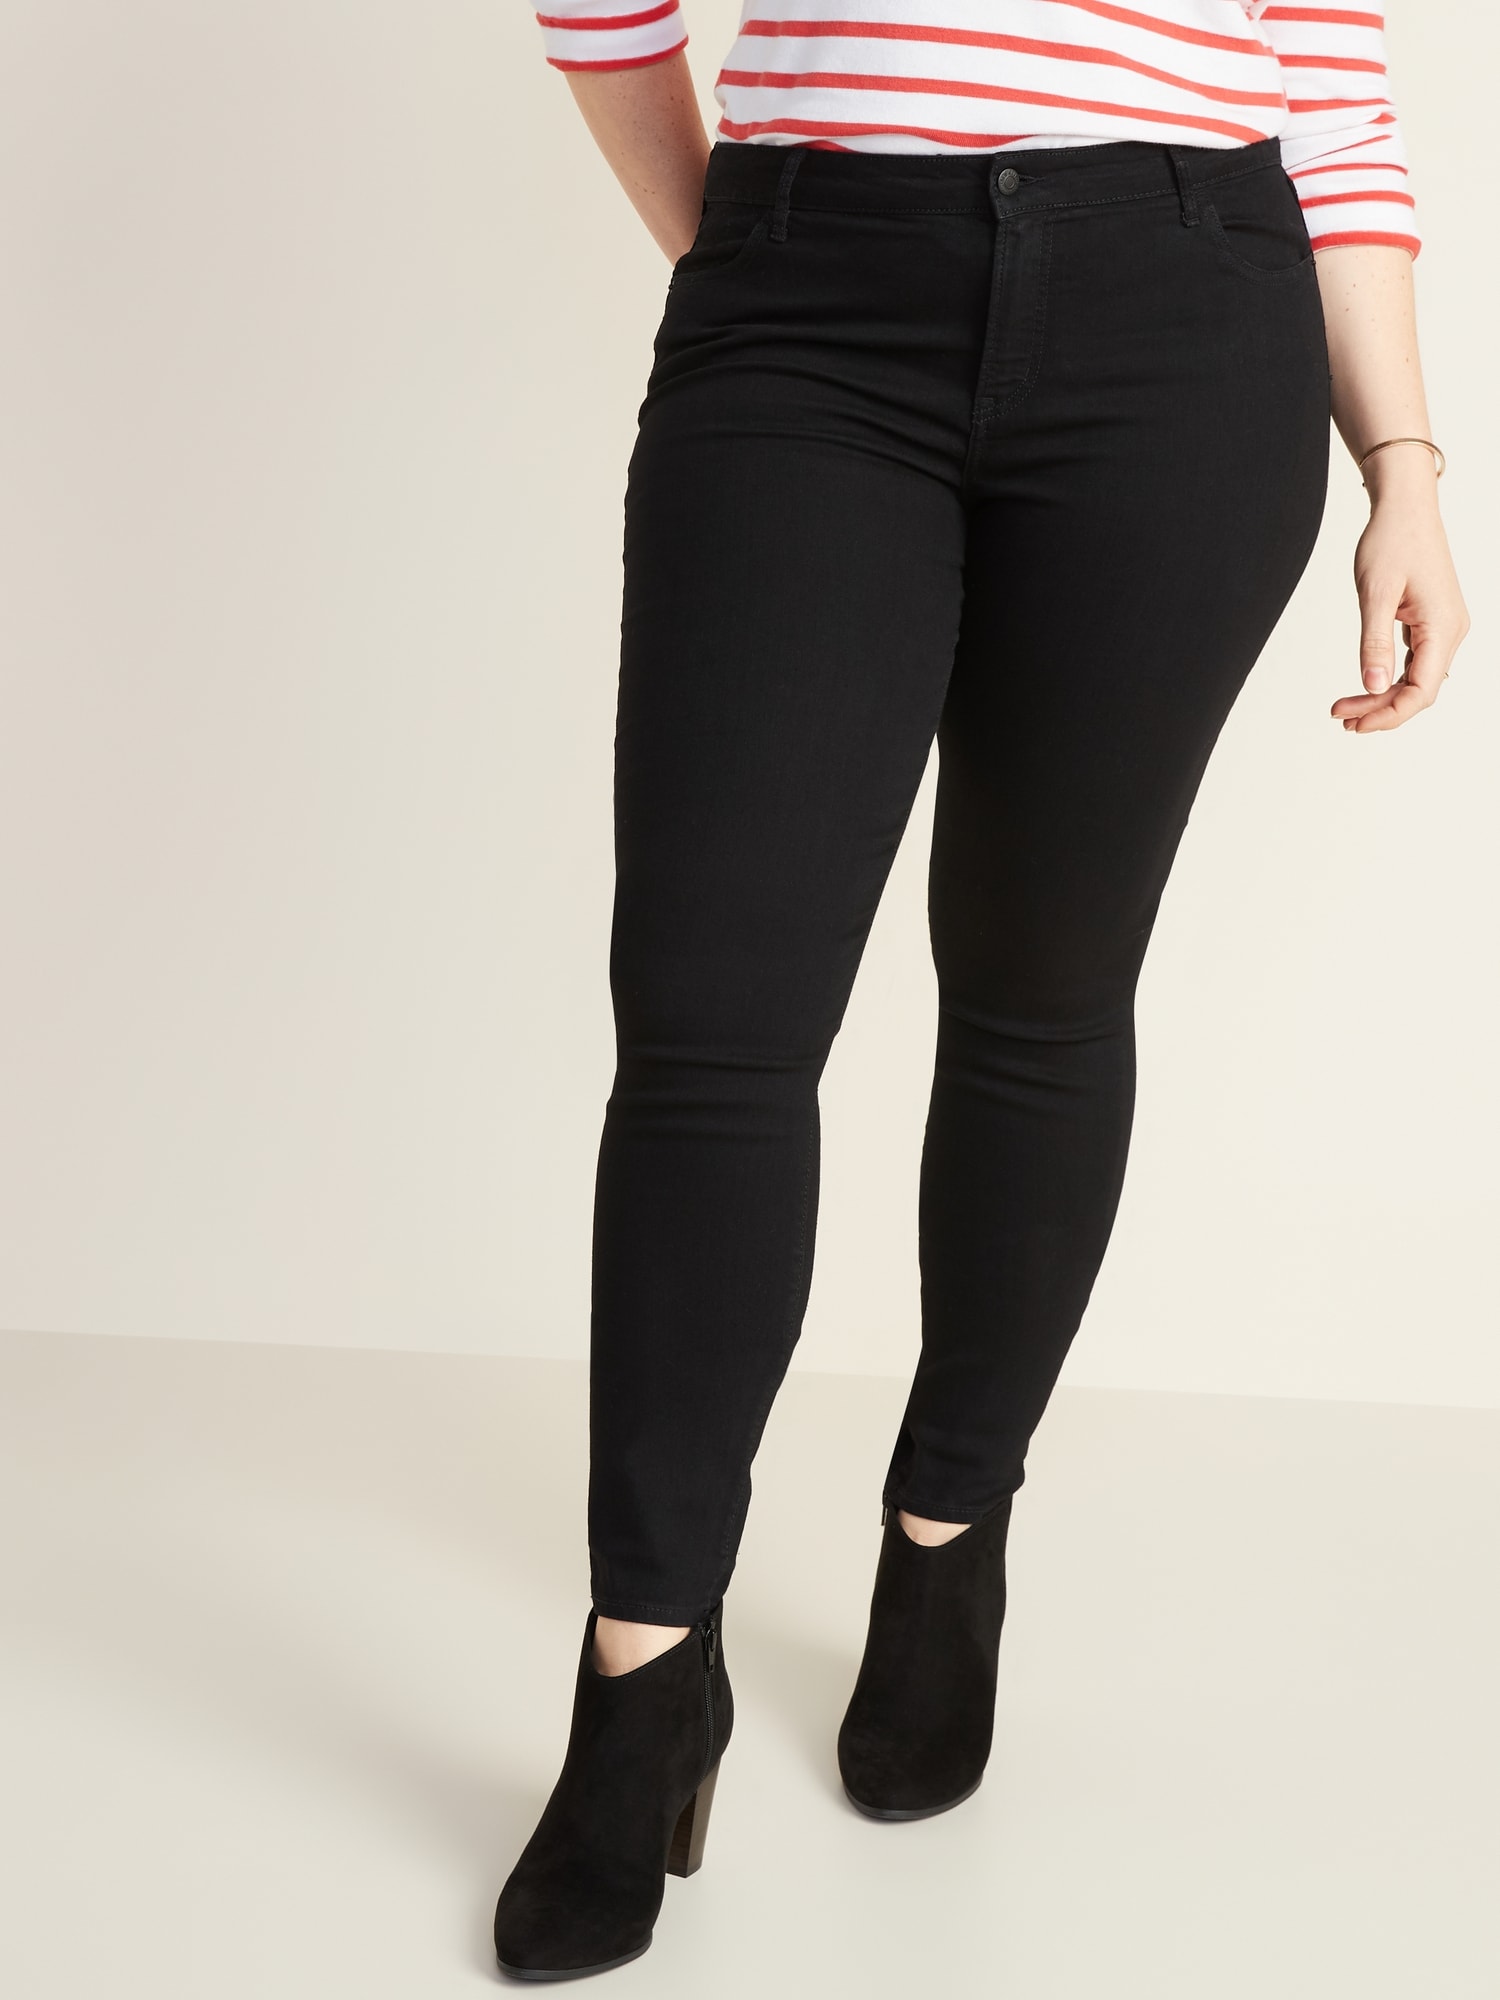 old navy black jeans womens